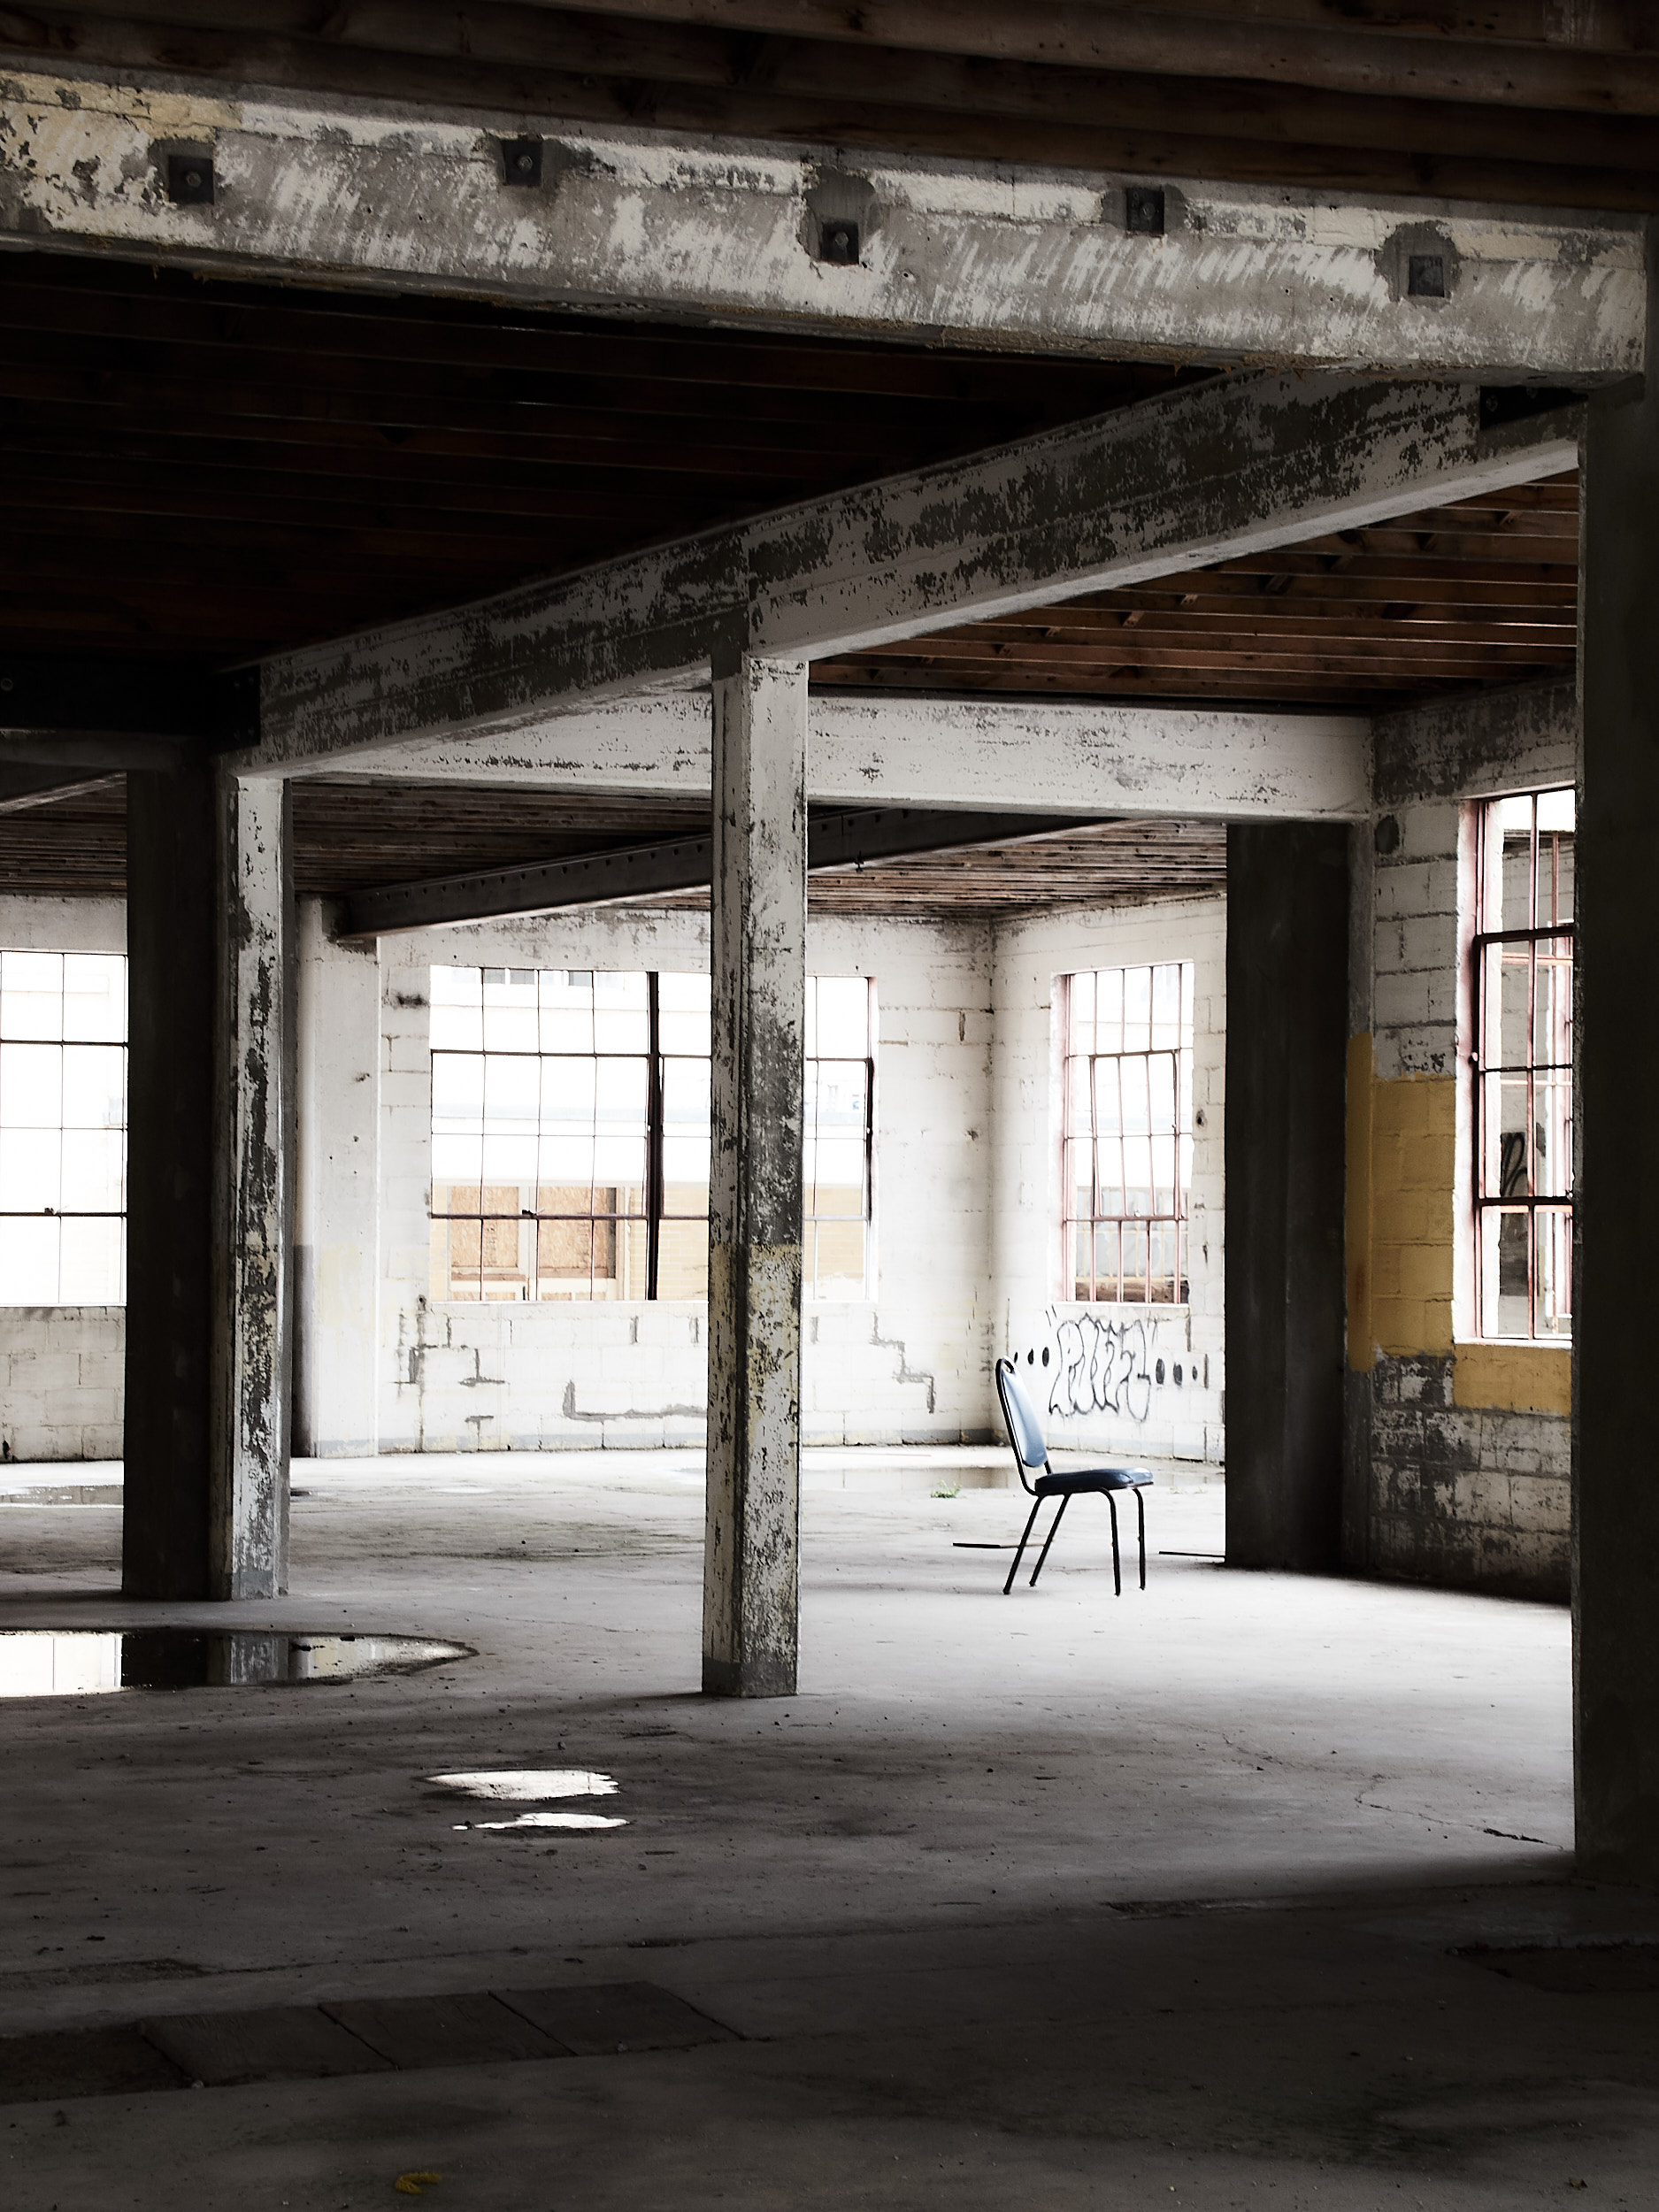 image of a chair sitting in an empty industrial space with light streaming in from the right edge of the frame